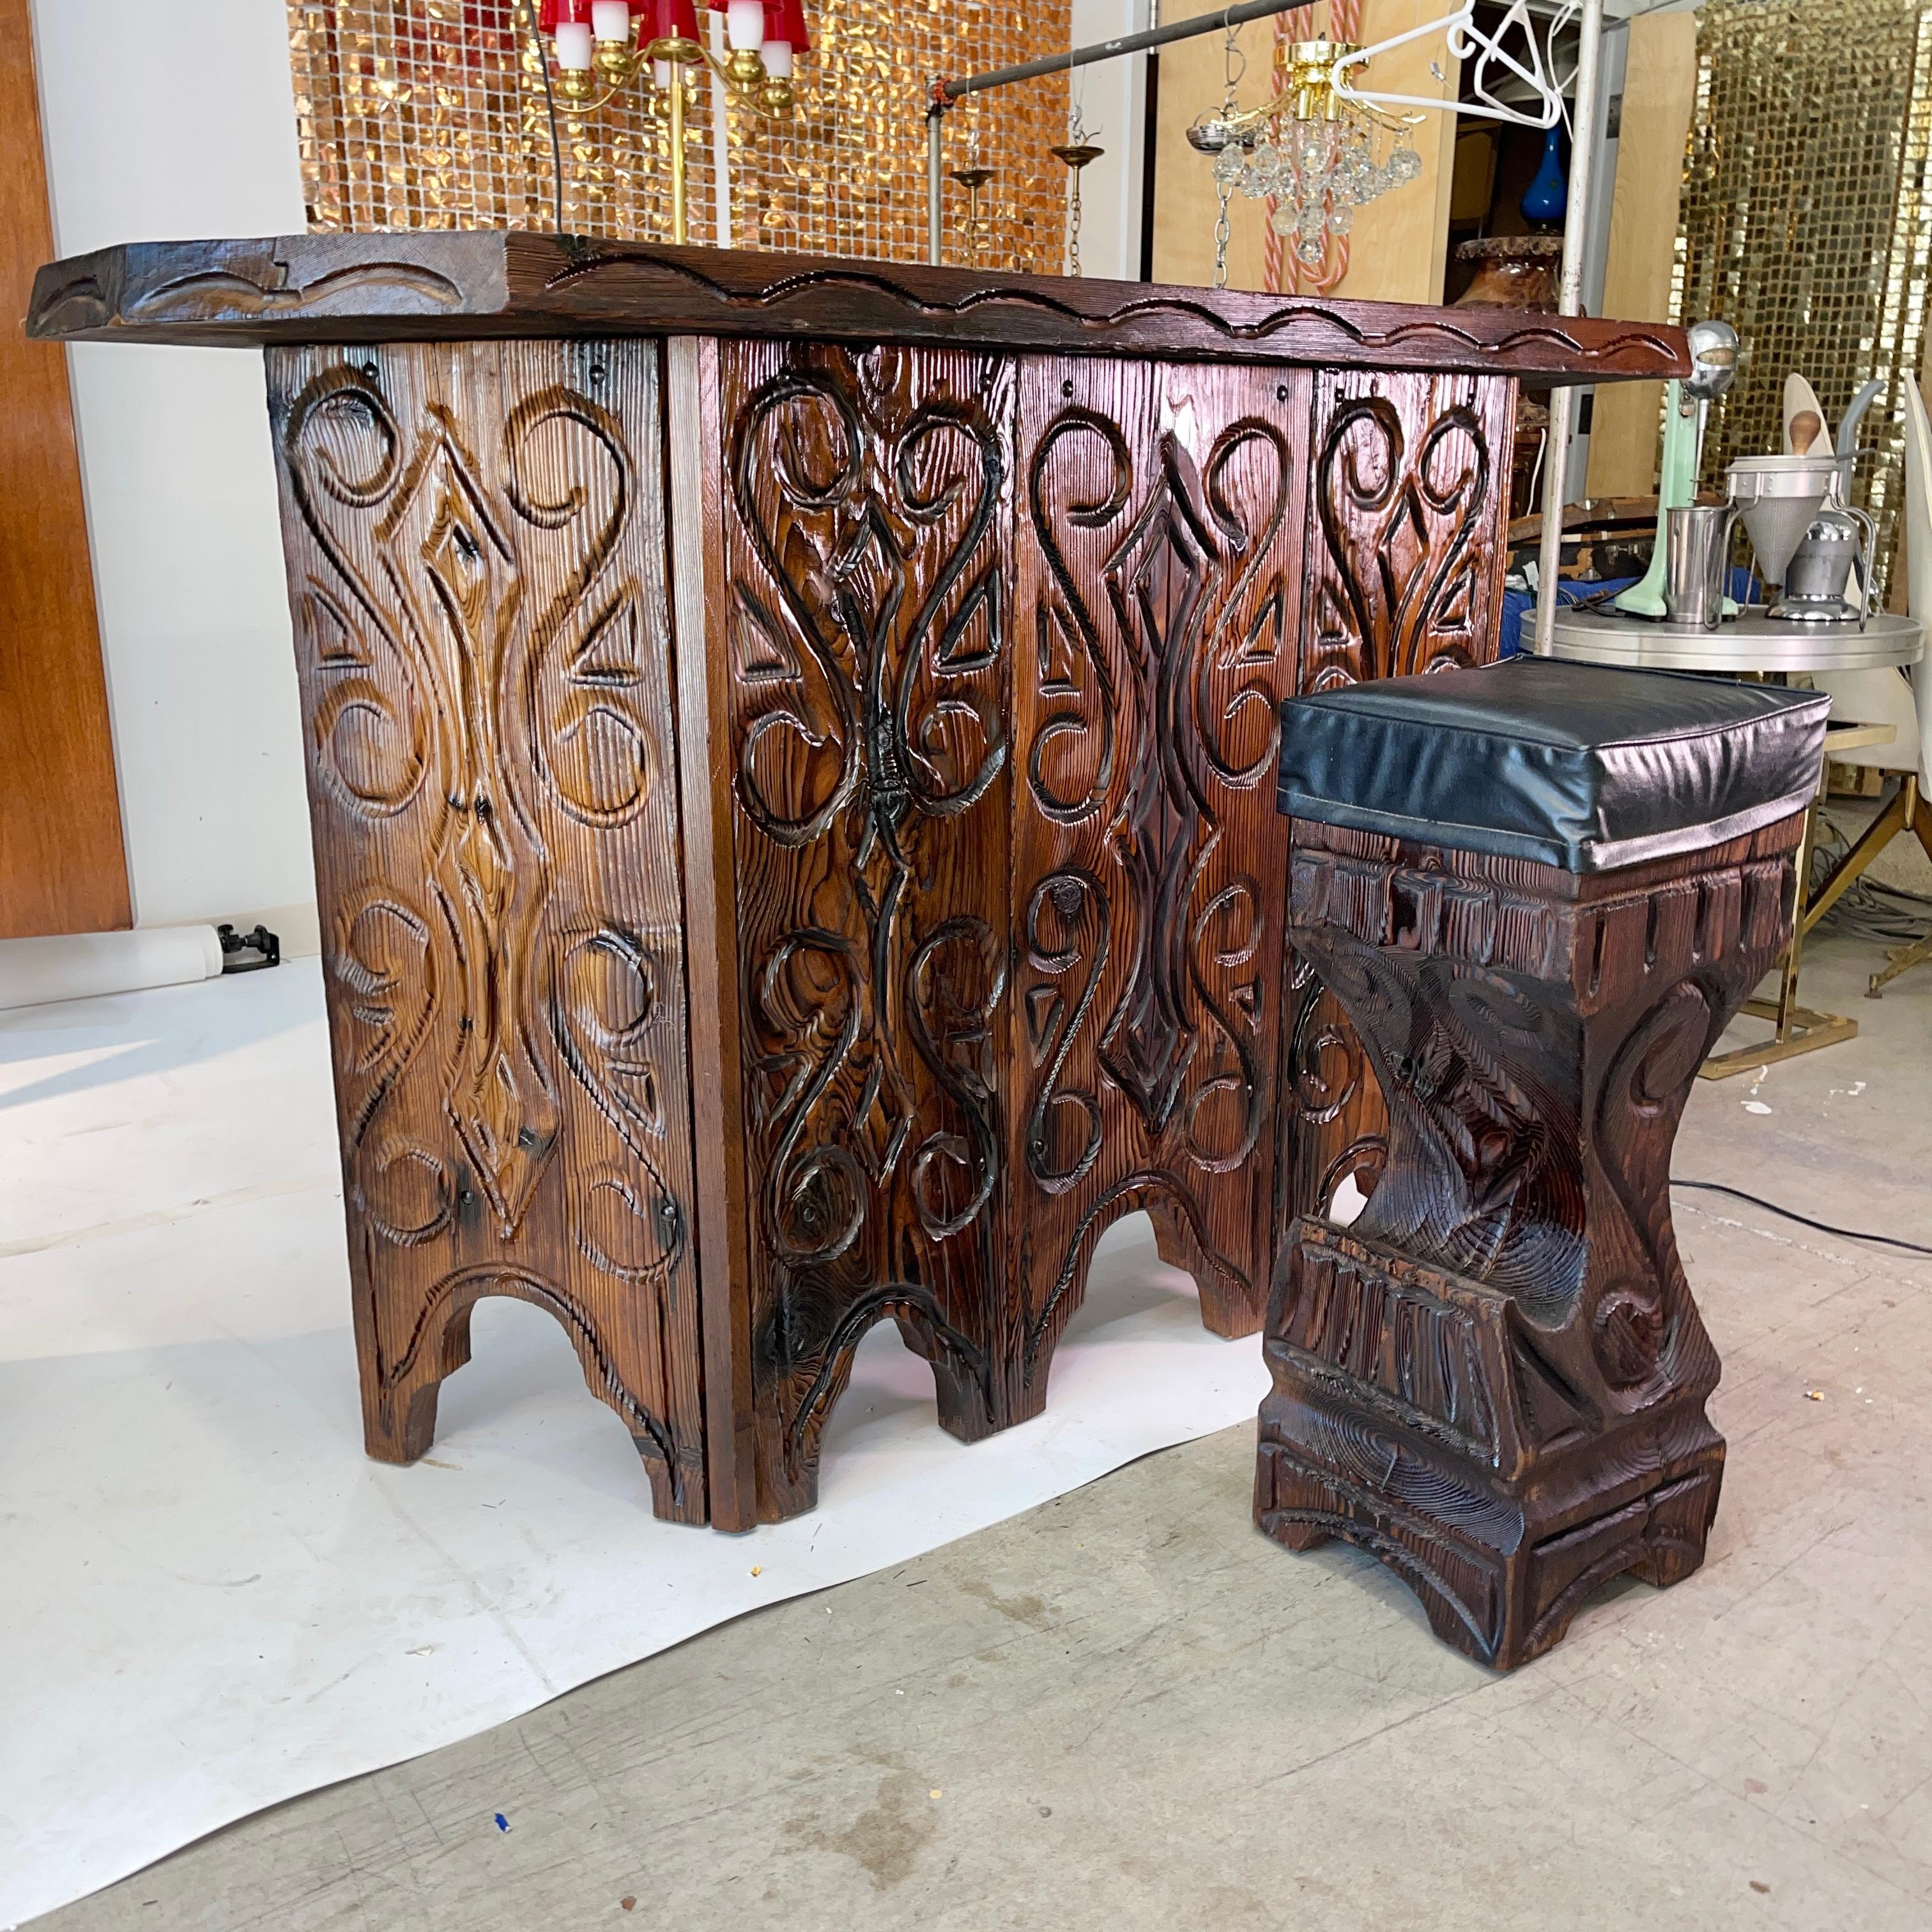 Original Witco Hacienda bar (model X265) and THREE stools (model K-55B) by William Westenhaver. Hand and chainsaw carved. No two are identical. Indulge in some cultural appropriation and add this Mid-Century Modern Polynesian Tiki flavor to your